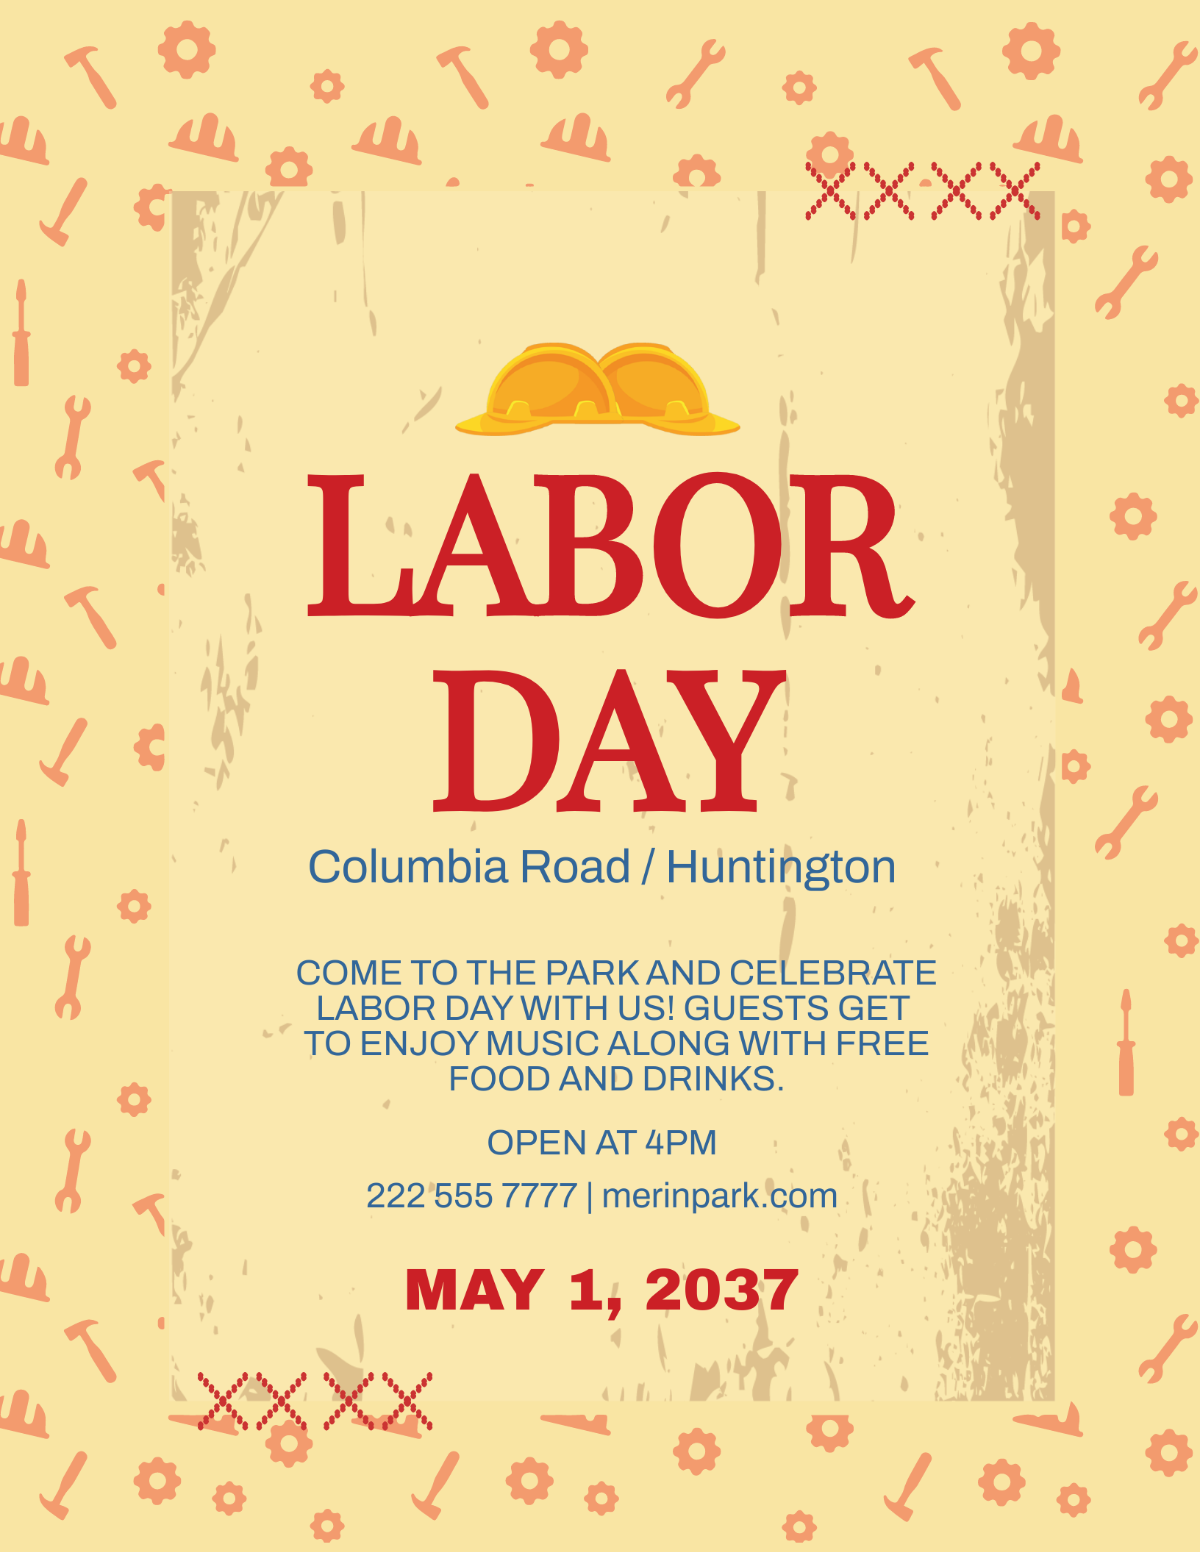 Labor day party Flyer Template